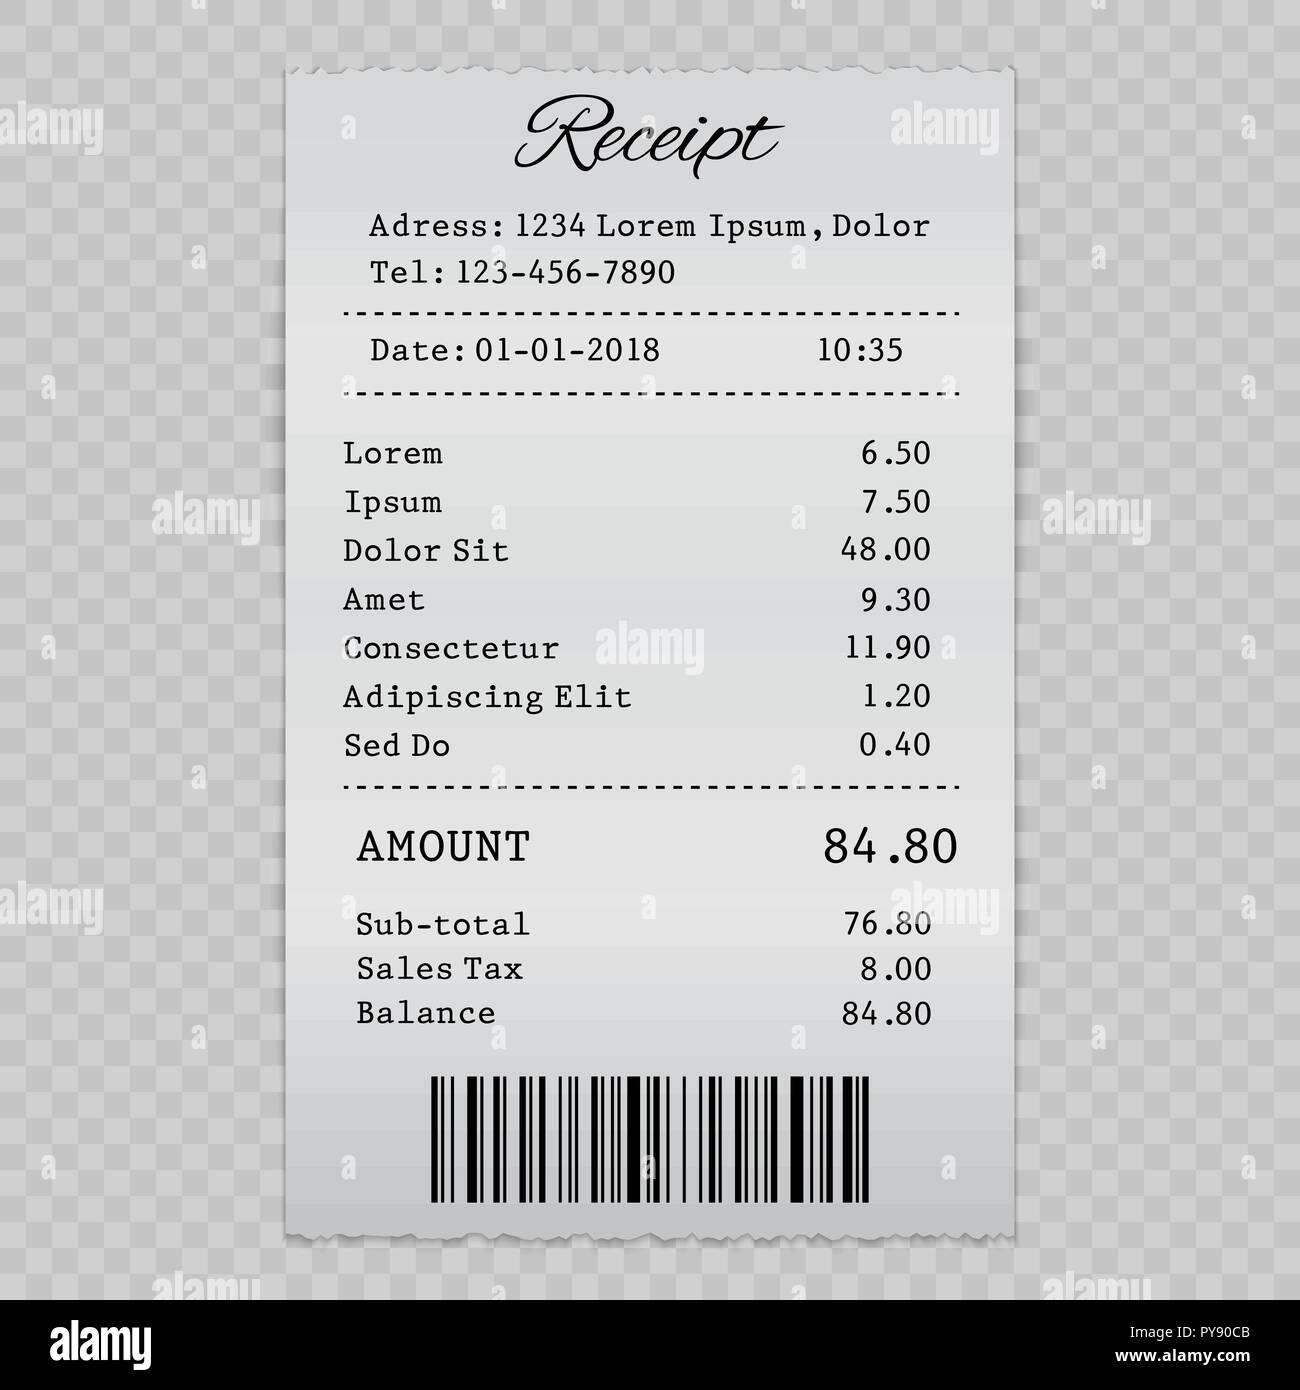 Black and white vector illustration of receipt template Stock Vector